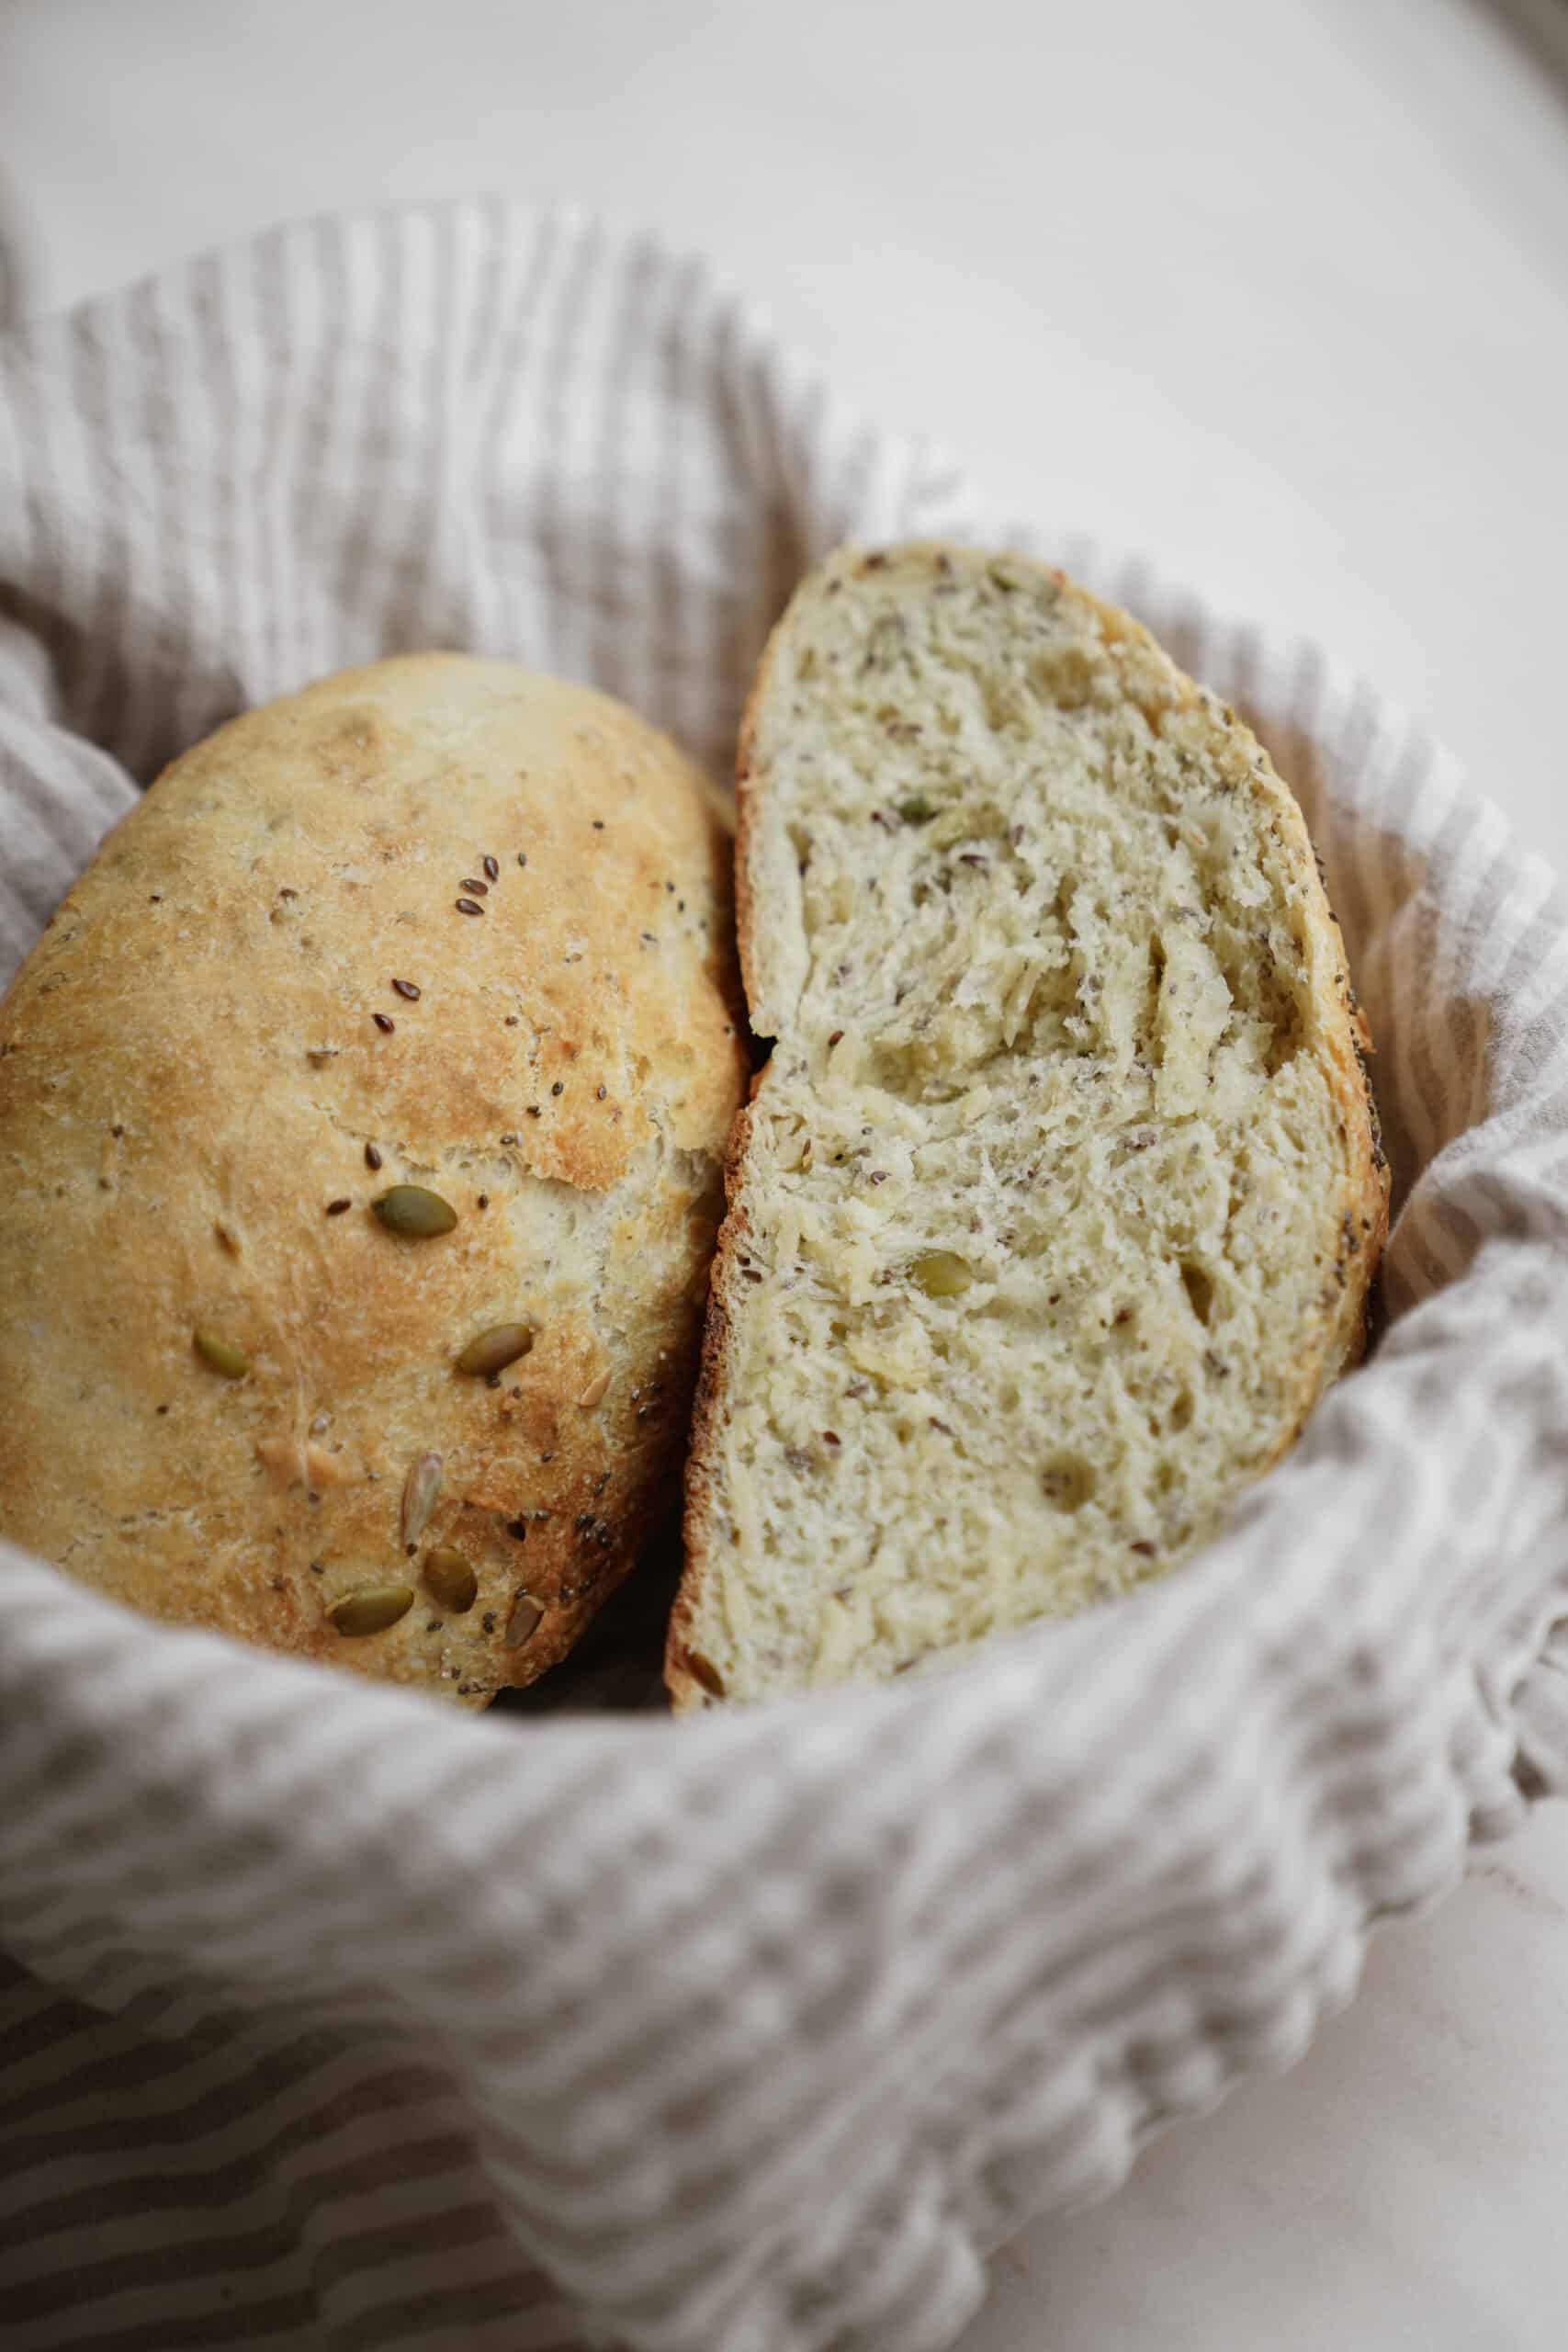 One of my fav dutch oven bread recipes for no-knead seedy bread. Bread slices in a basket.